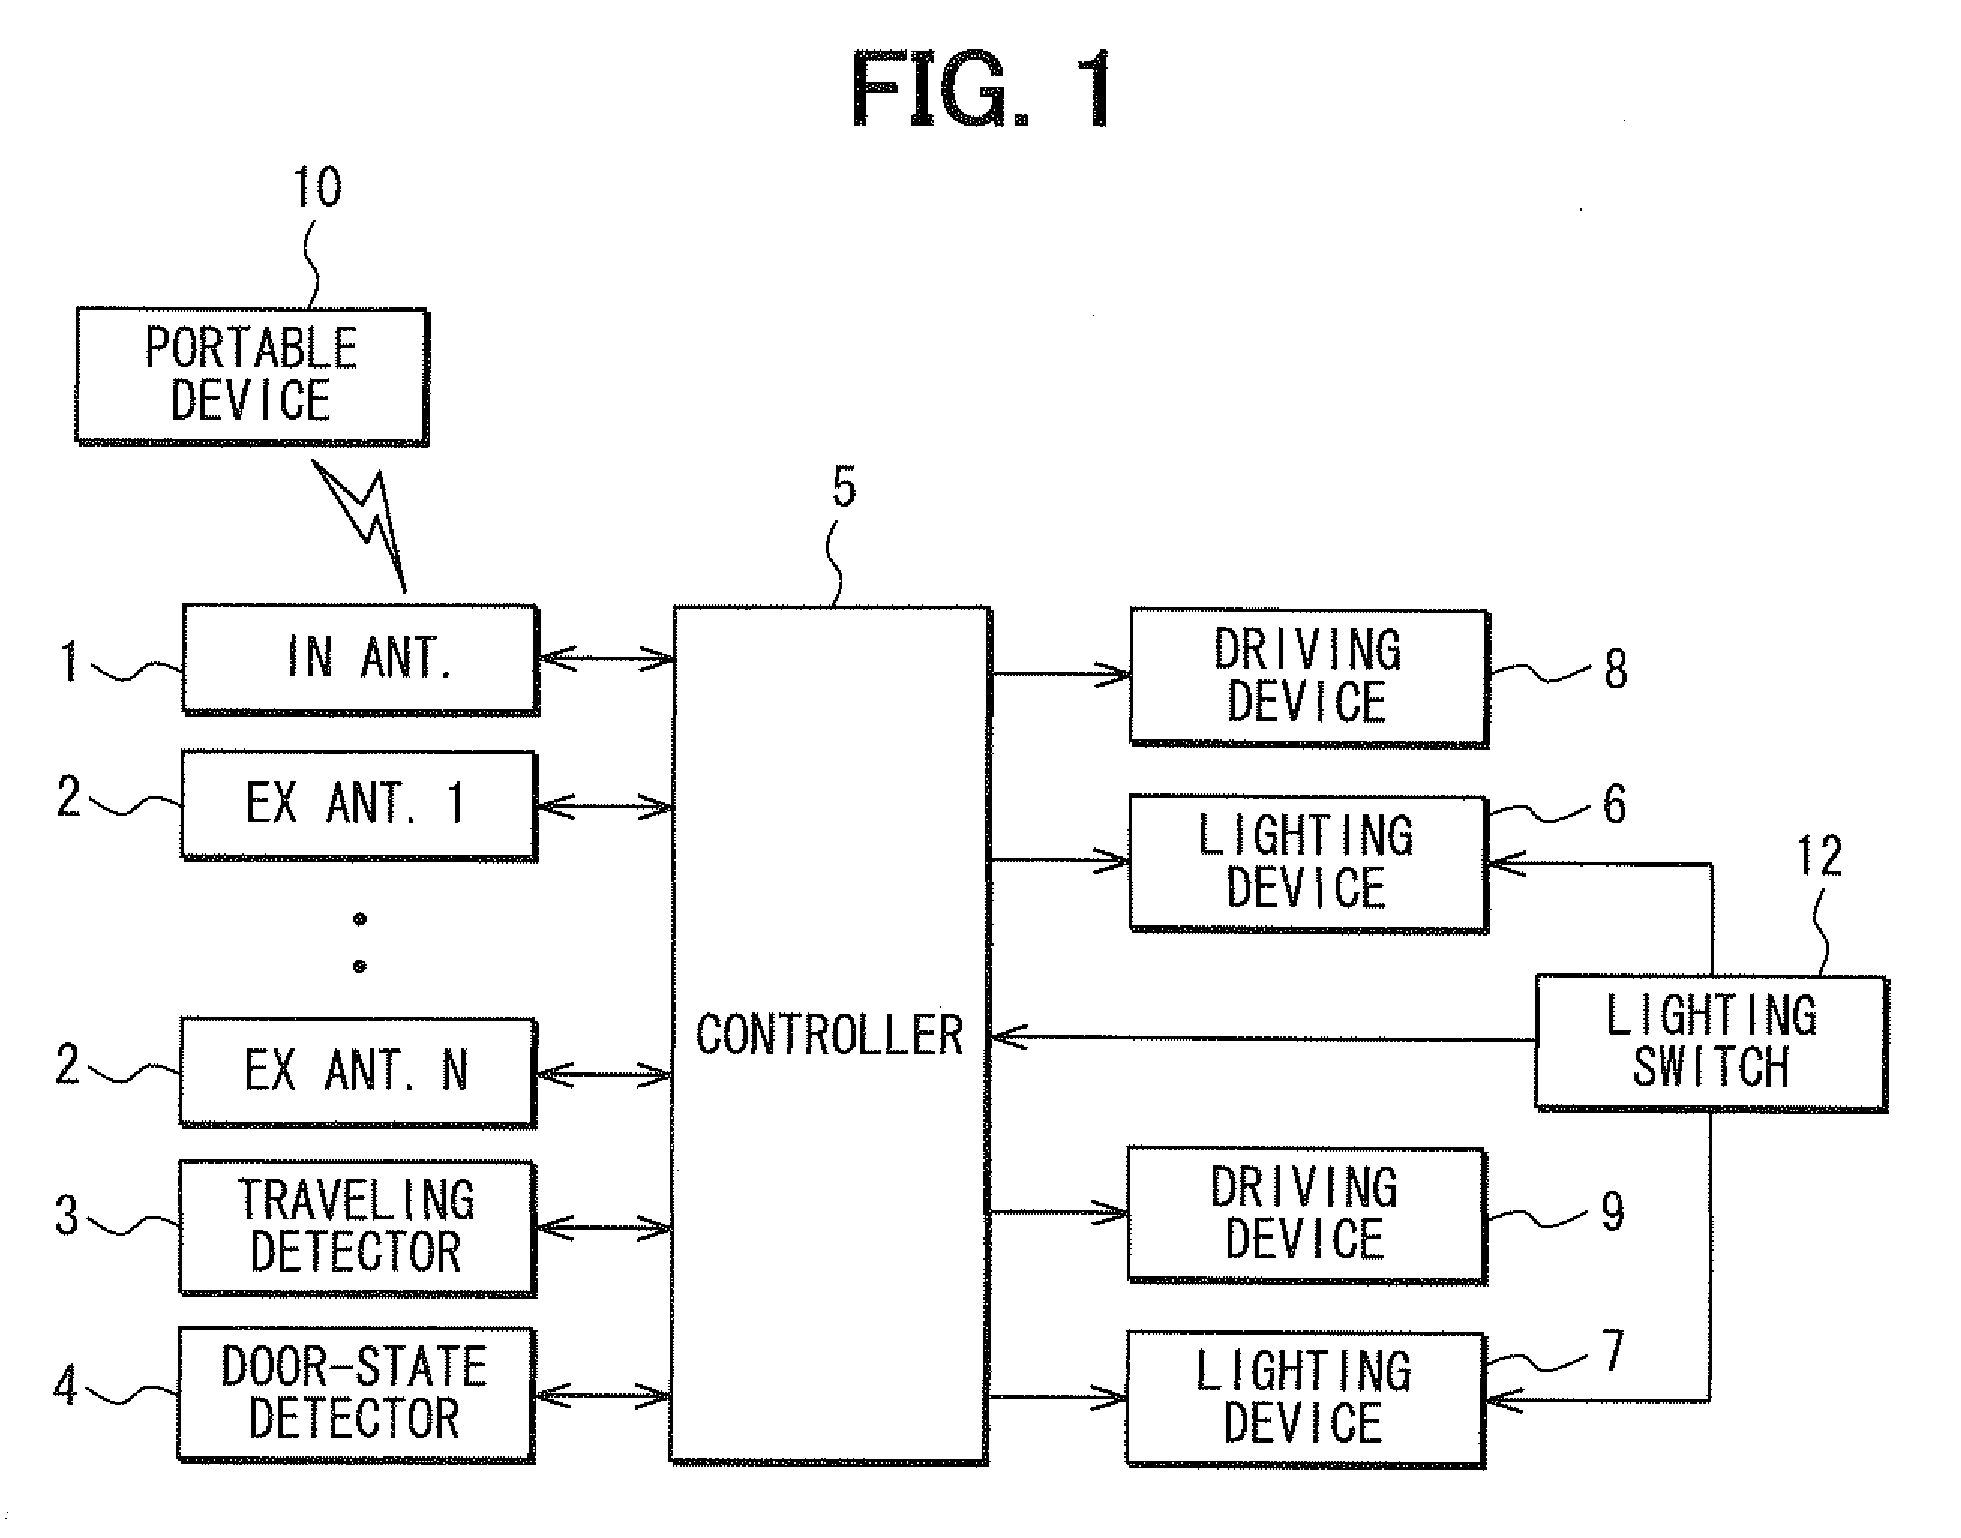 Lighting control apparatus for vehicle